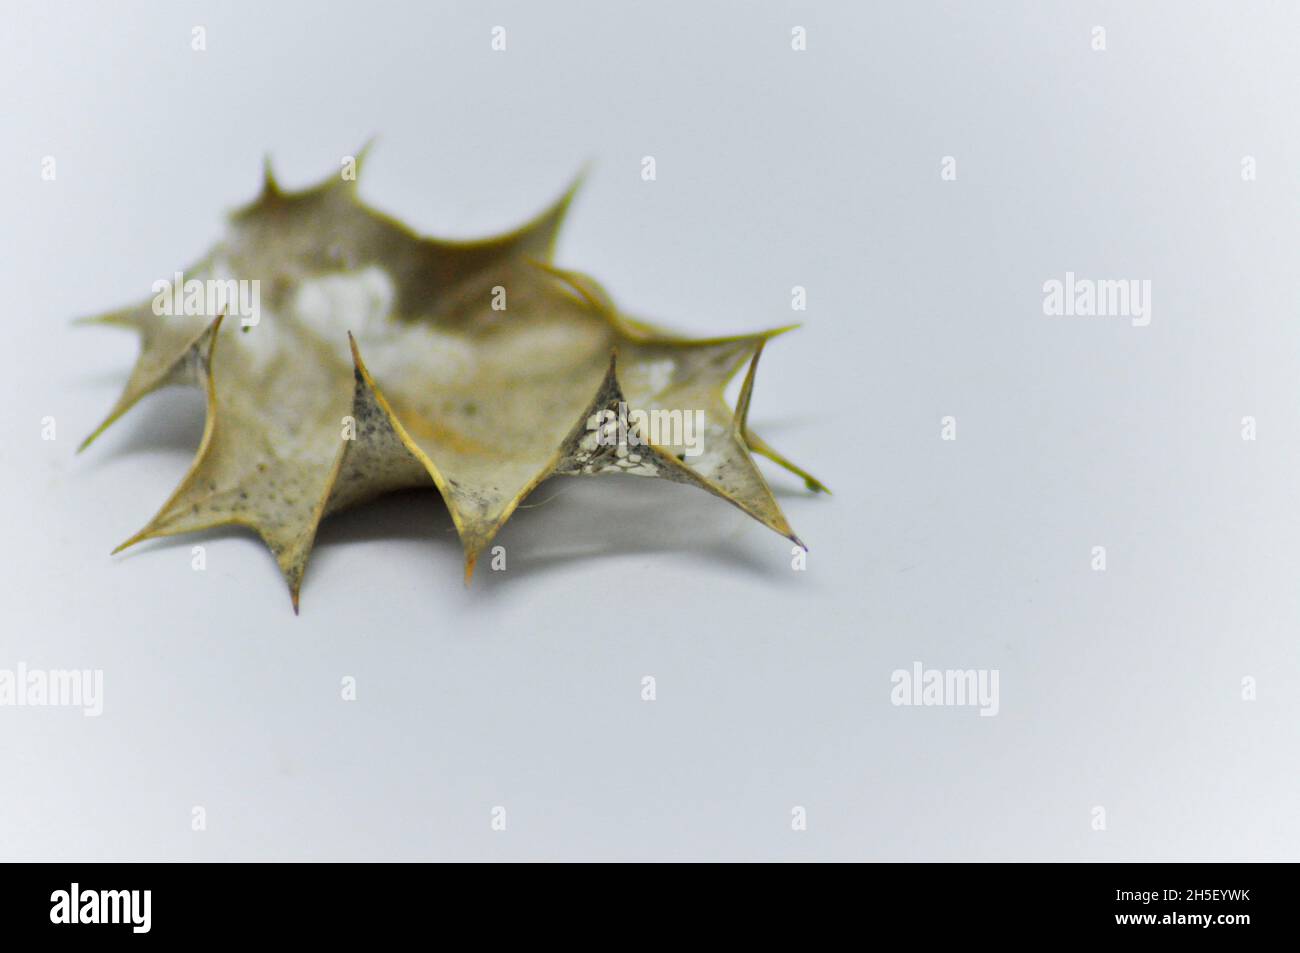 A partially decomposed holly leaf (Ilex) showing it's skeletal structure in places set against a white background Stock Photo